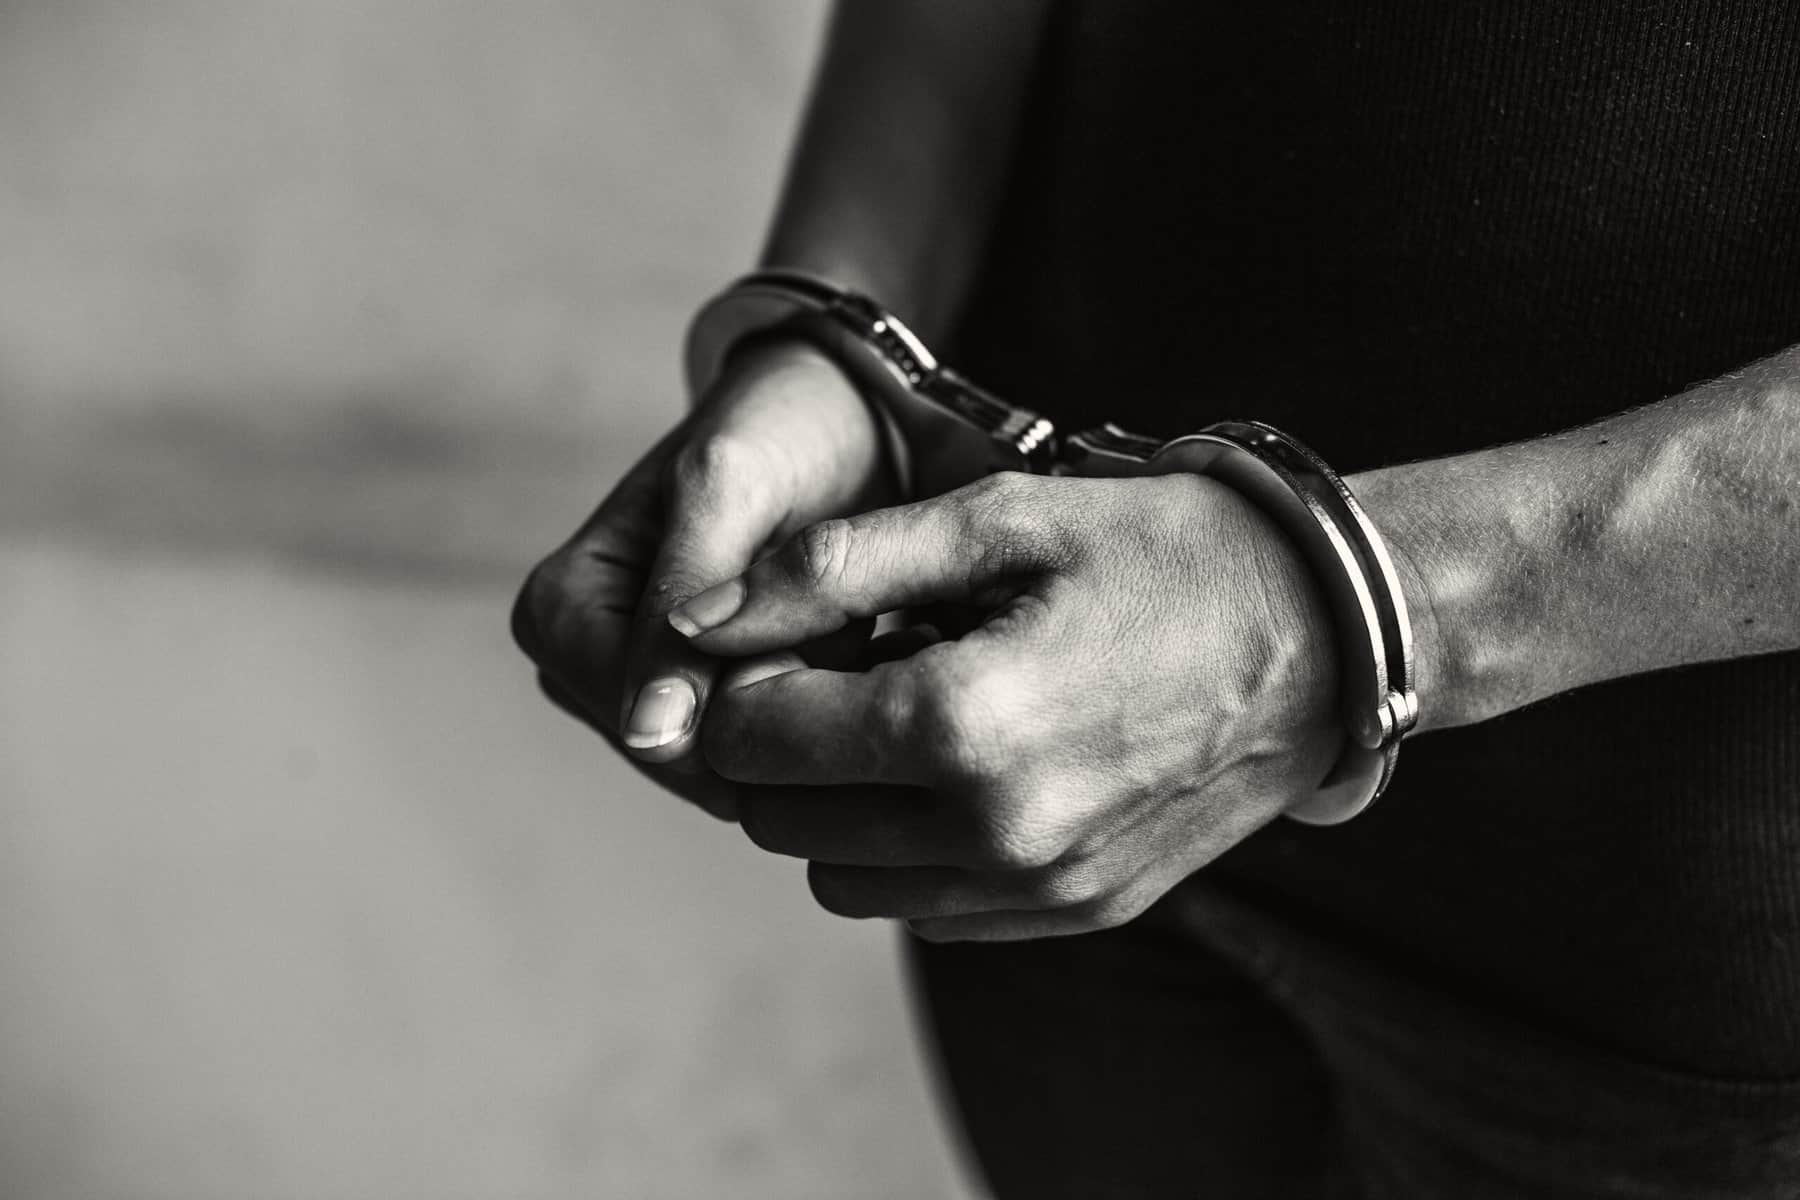 A prisoner's forearms and hands are shown with handcuffs on the wrists in this black and white image.